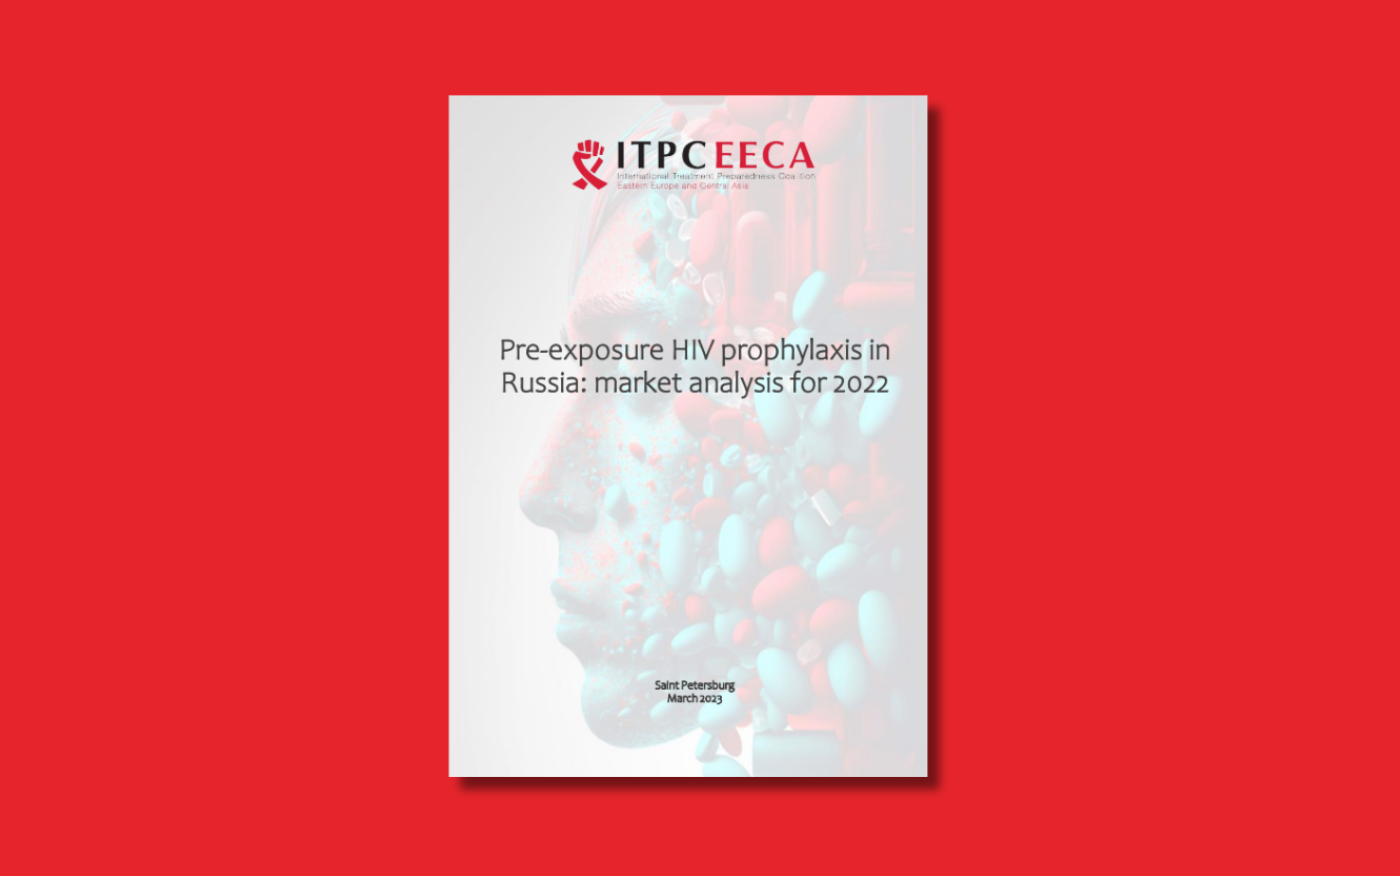 Pre-exposure HIV prophylaxis in Russia market analysis for 2022